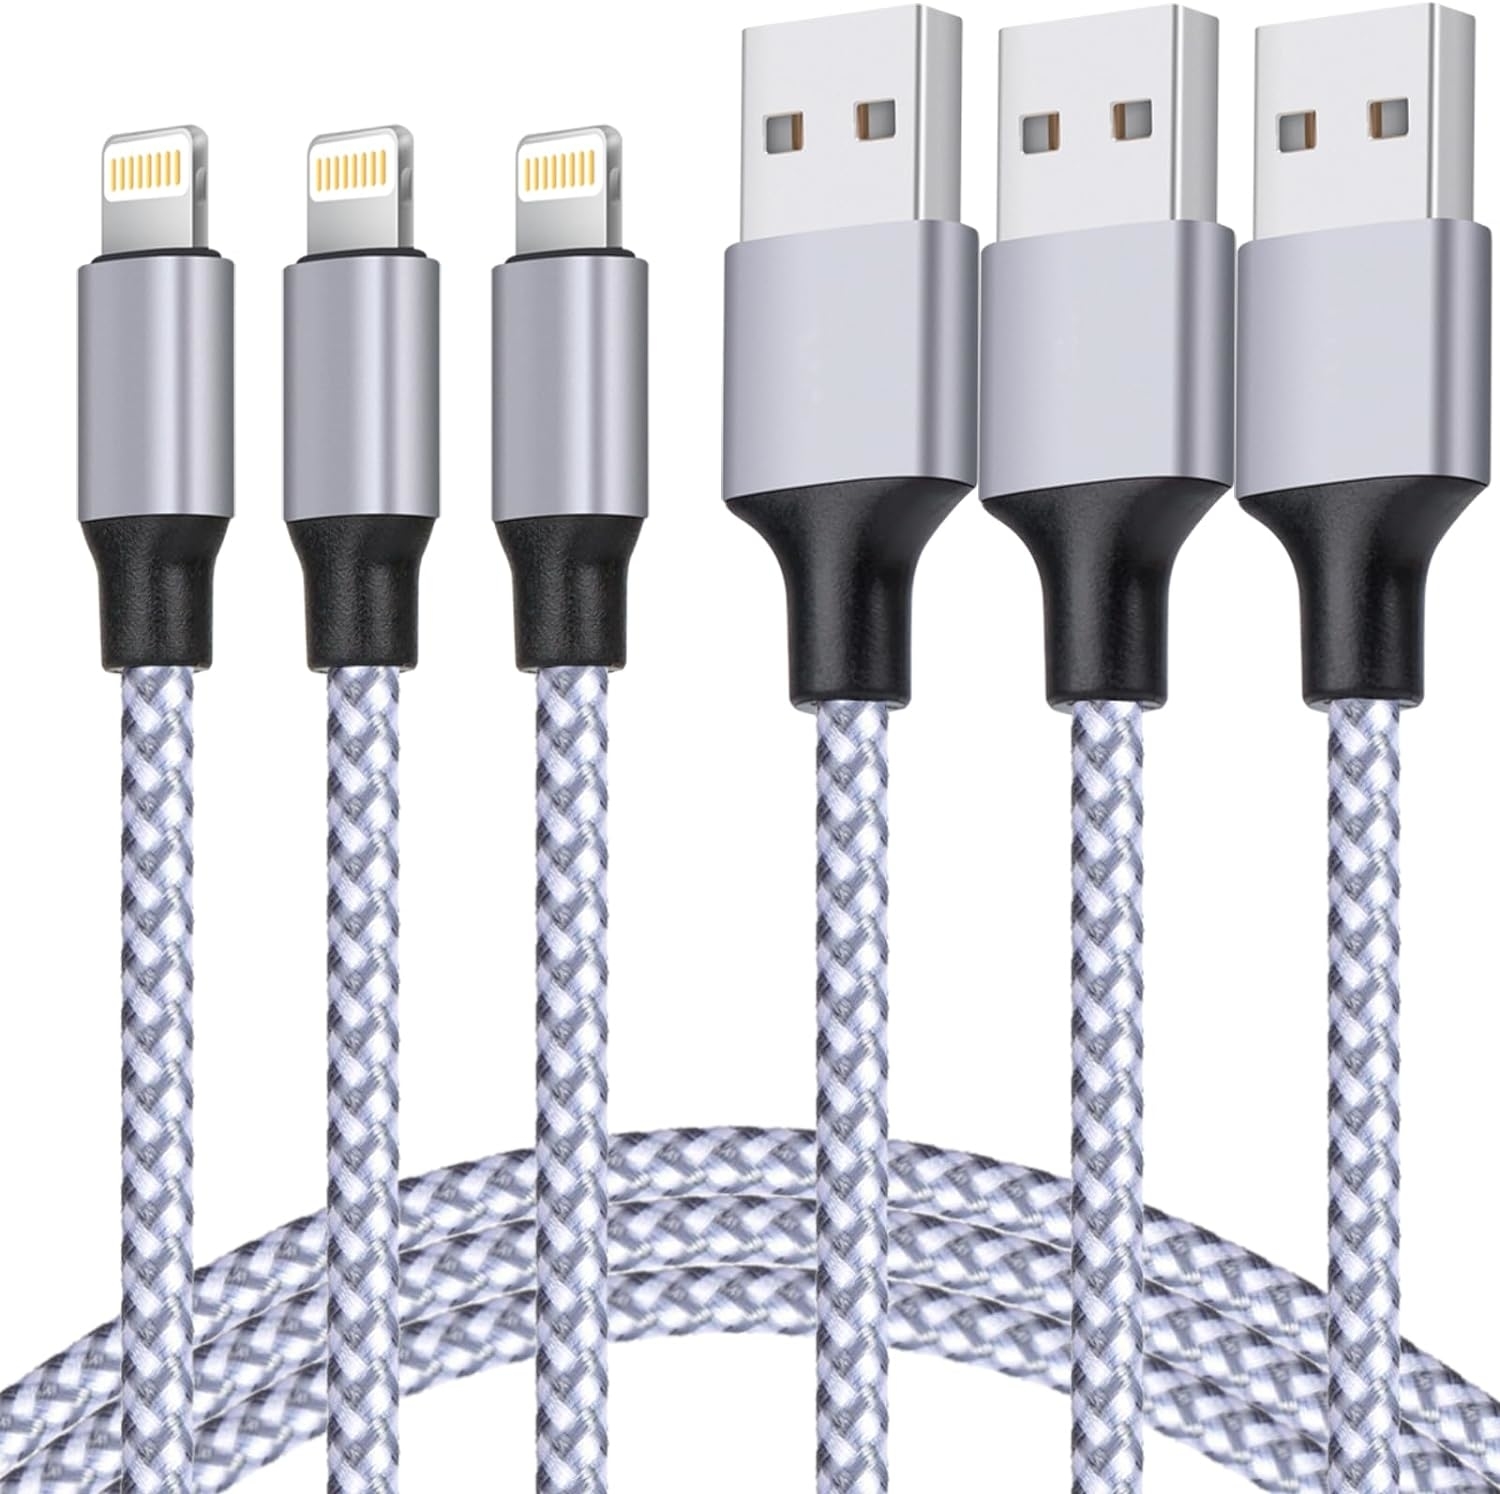 Five braided charging cables with USB and Lightning connectors on a white background